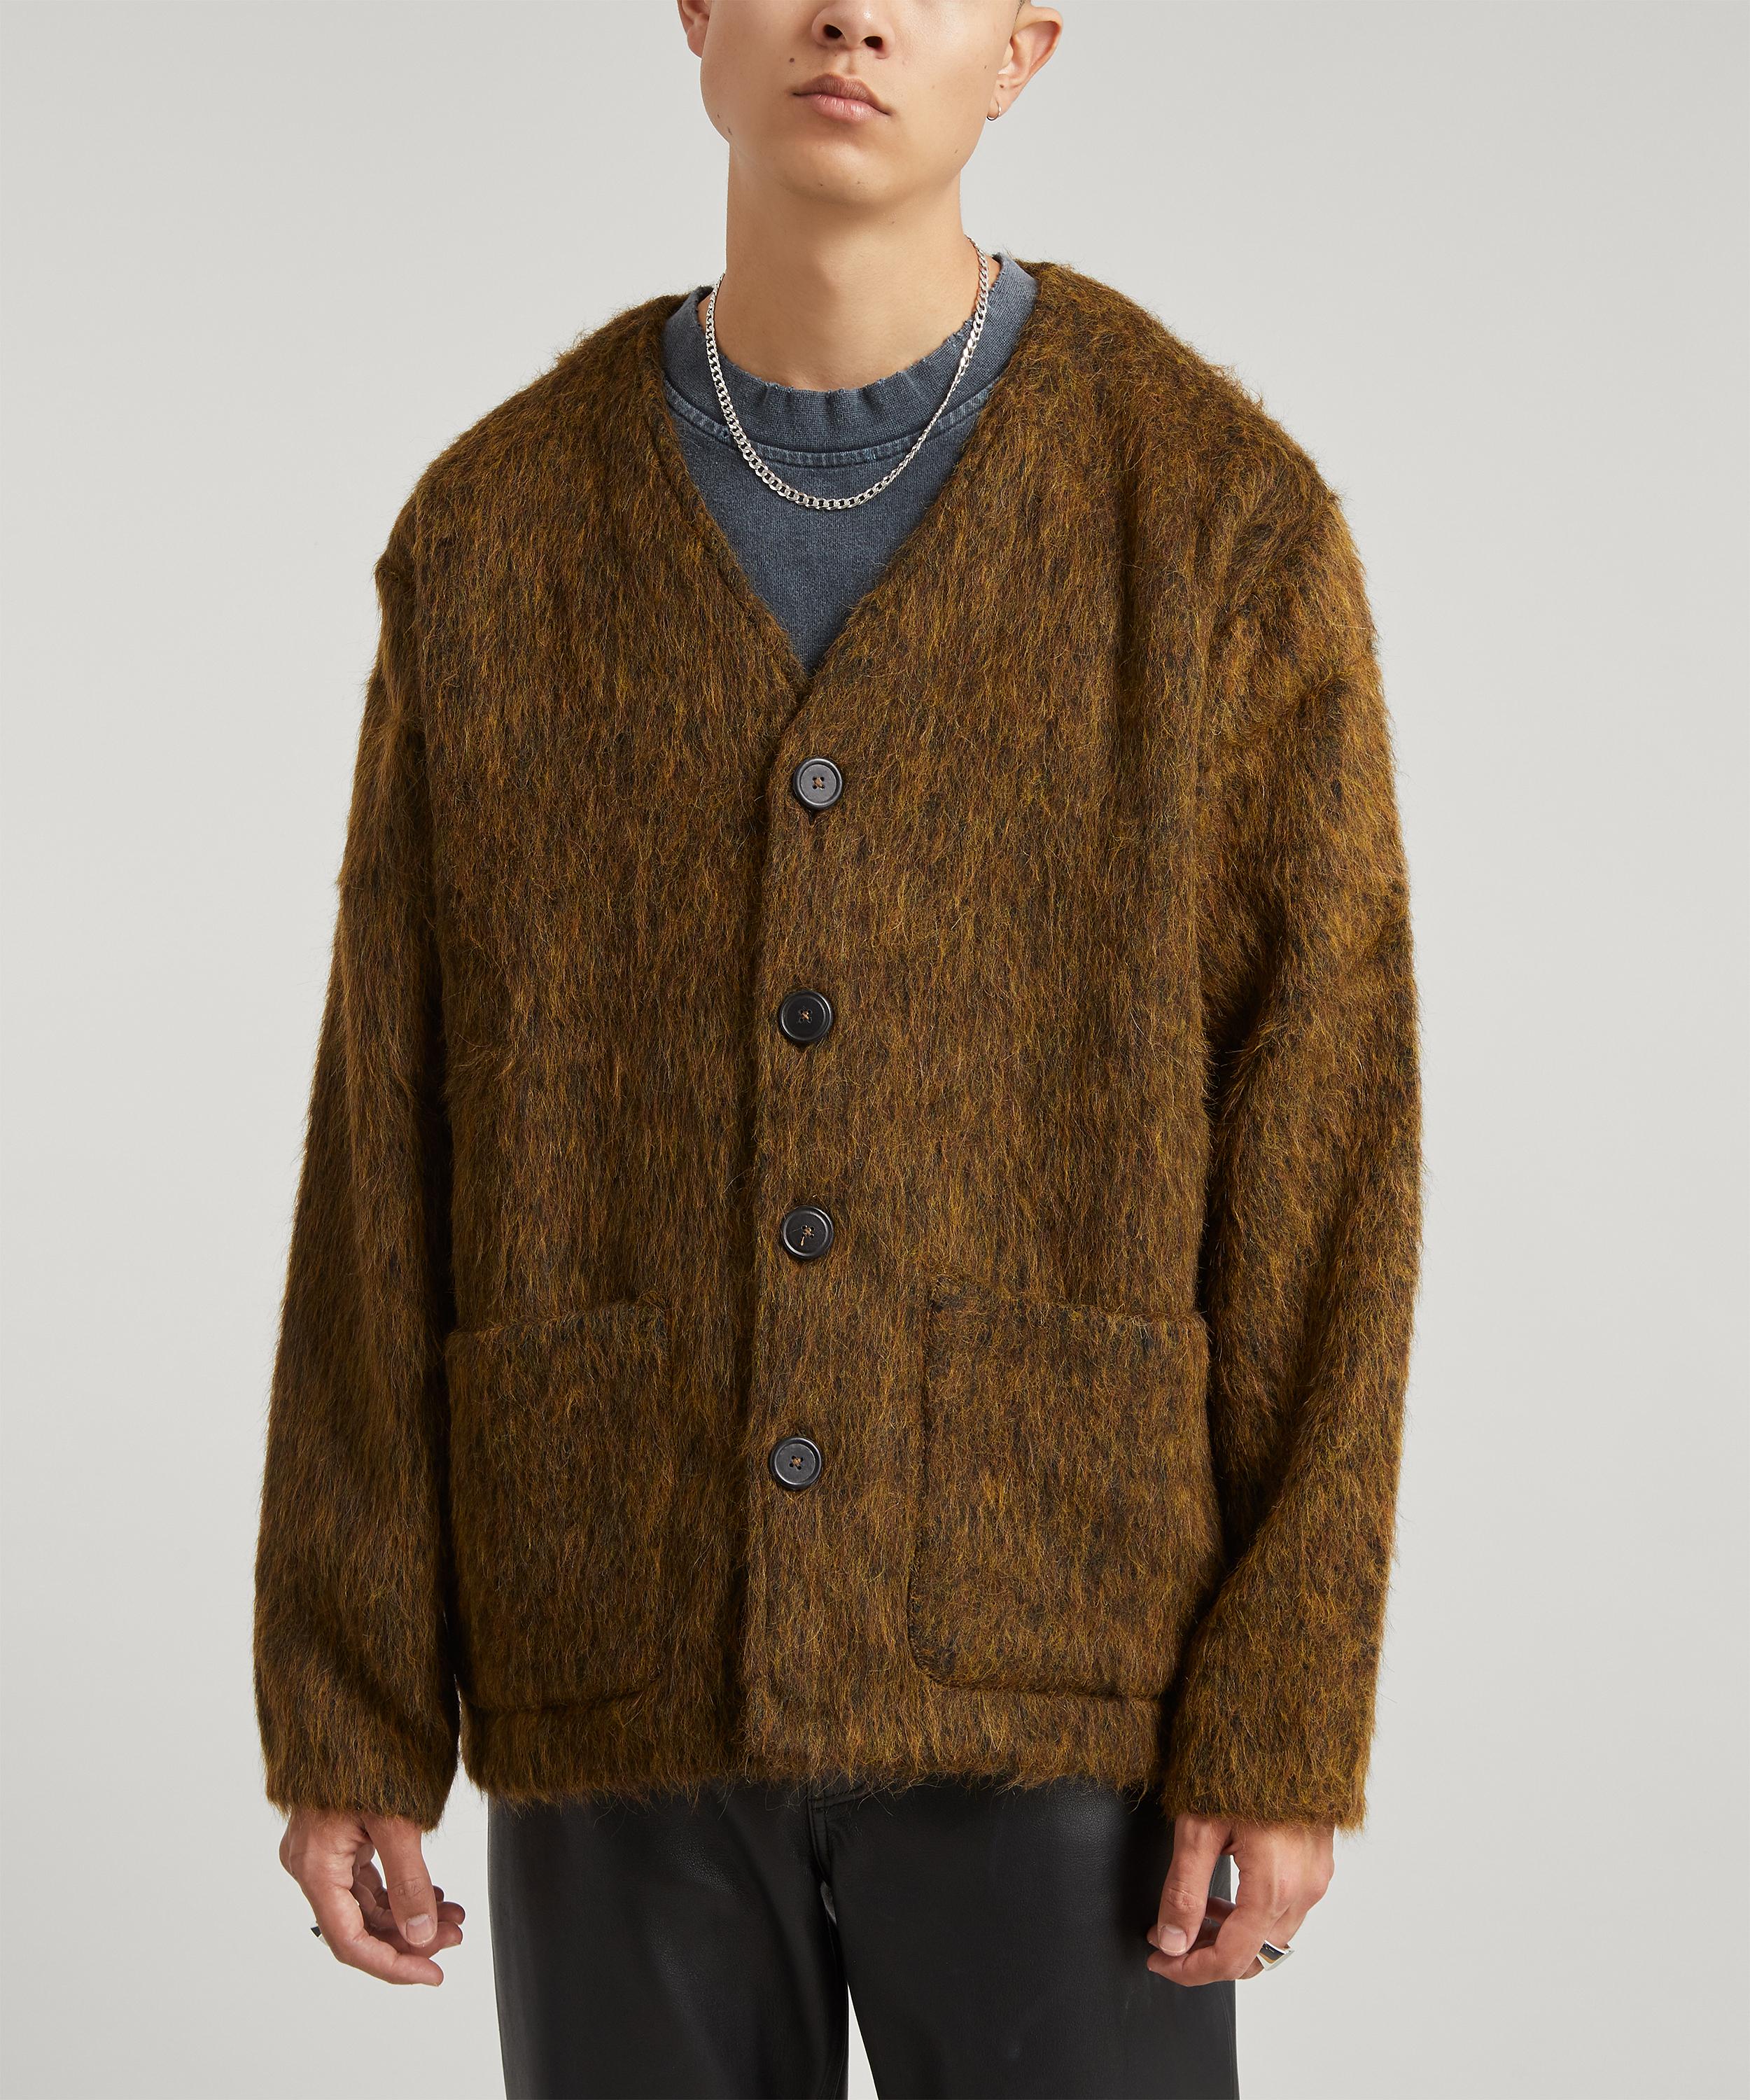 OUR LEGACY 稀少 21AW CARDIGAN OLIVE MELANGE MOHAIR モヘア 